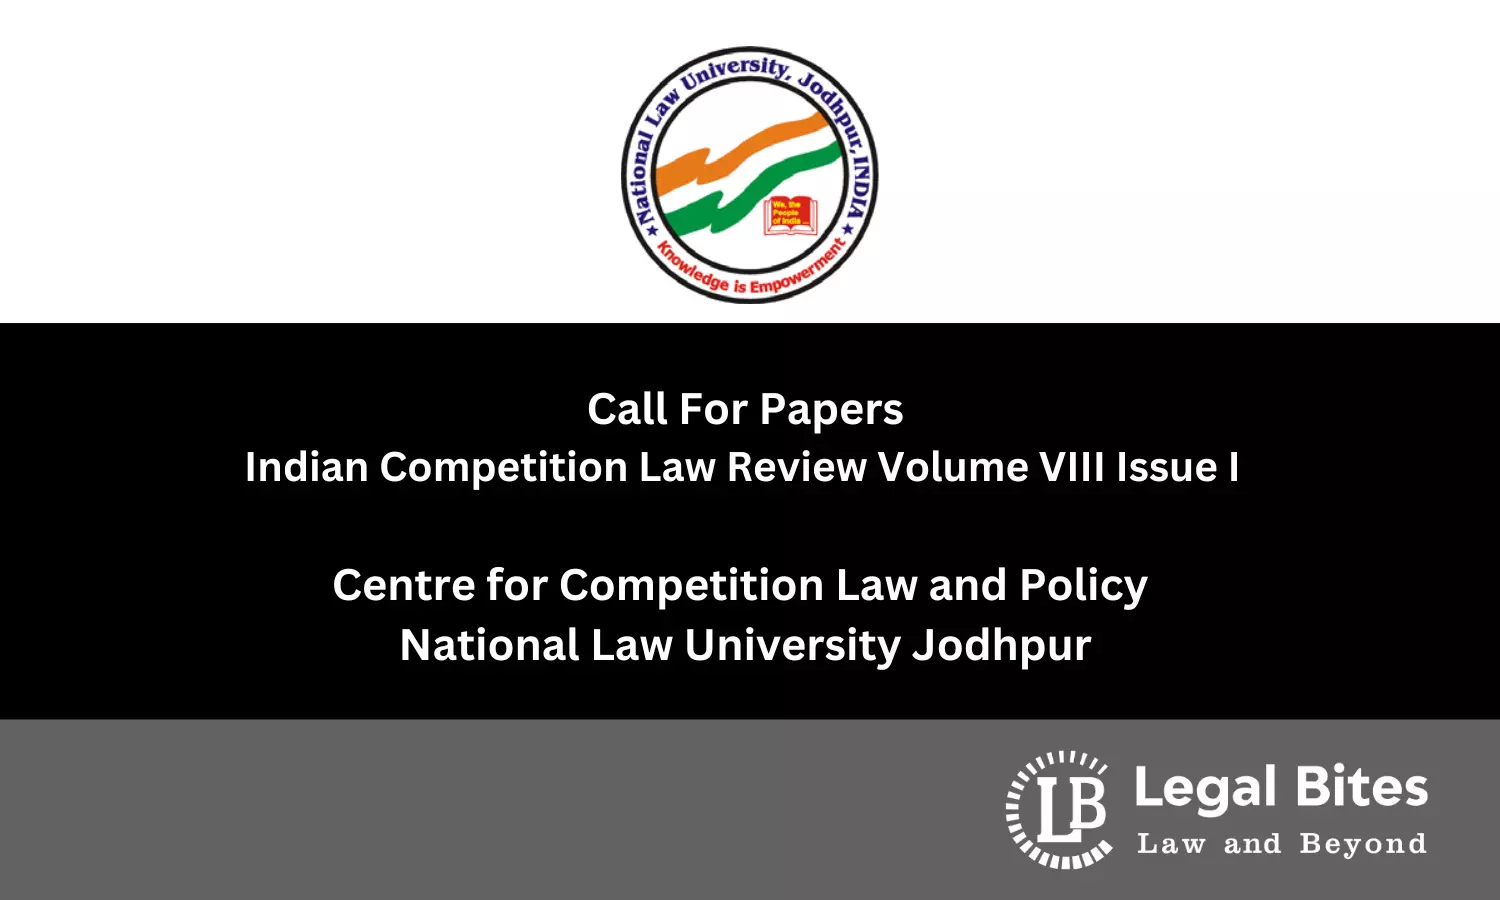 Indian Competition Law Review Volume VIII Issue I | Centre for Competition Law and Policy, National Law University Jodhpur